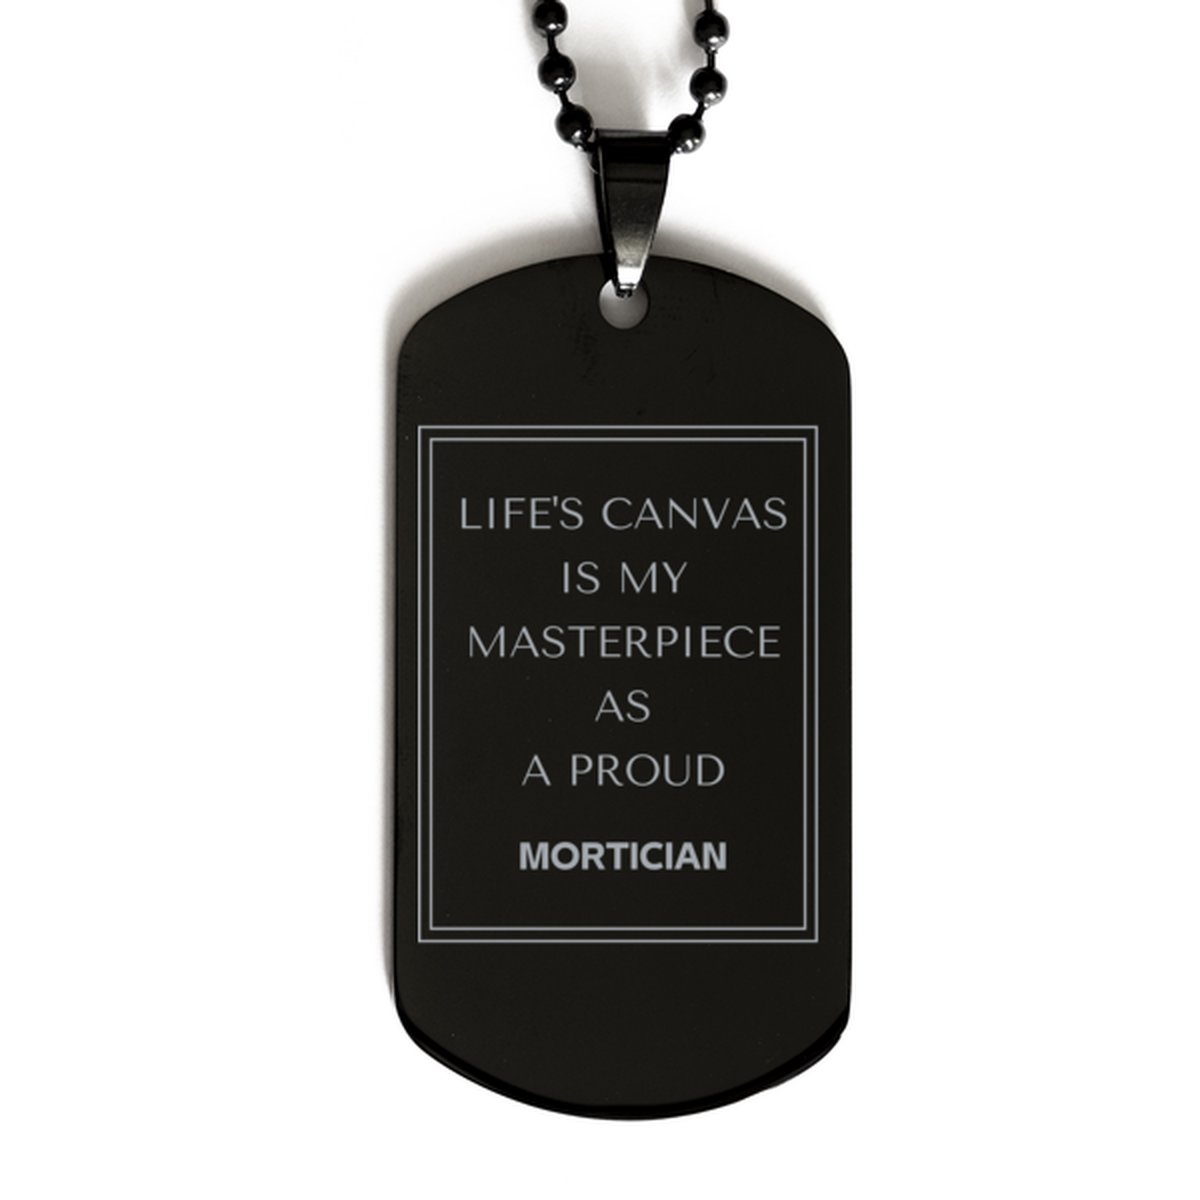 Proud Mortician Gifts, Life's canvas is my masterpiece, Epic Birthday Christmas Unique Black Dog Tag For Mortician, Coworkers, Men, Women, Friends